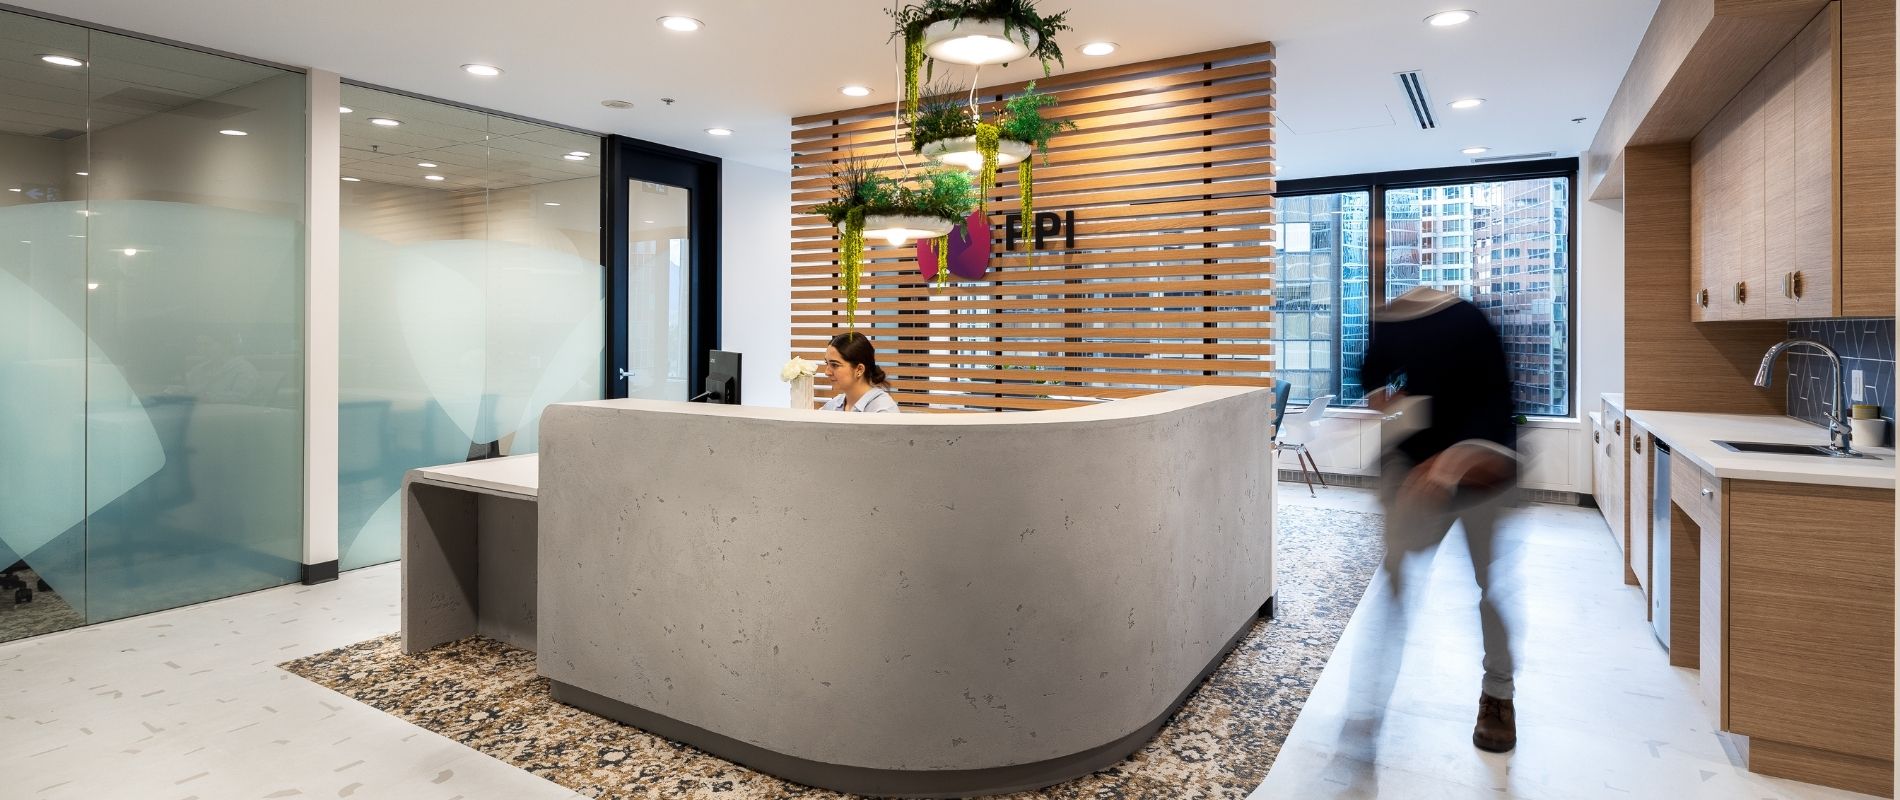 Creating meaningful connections through office design